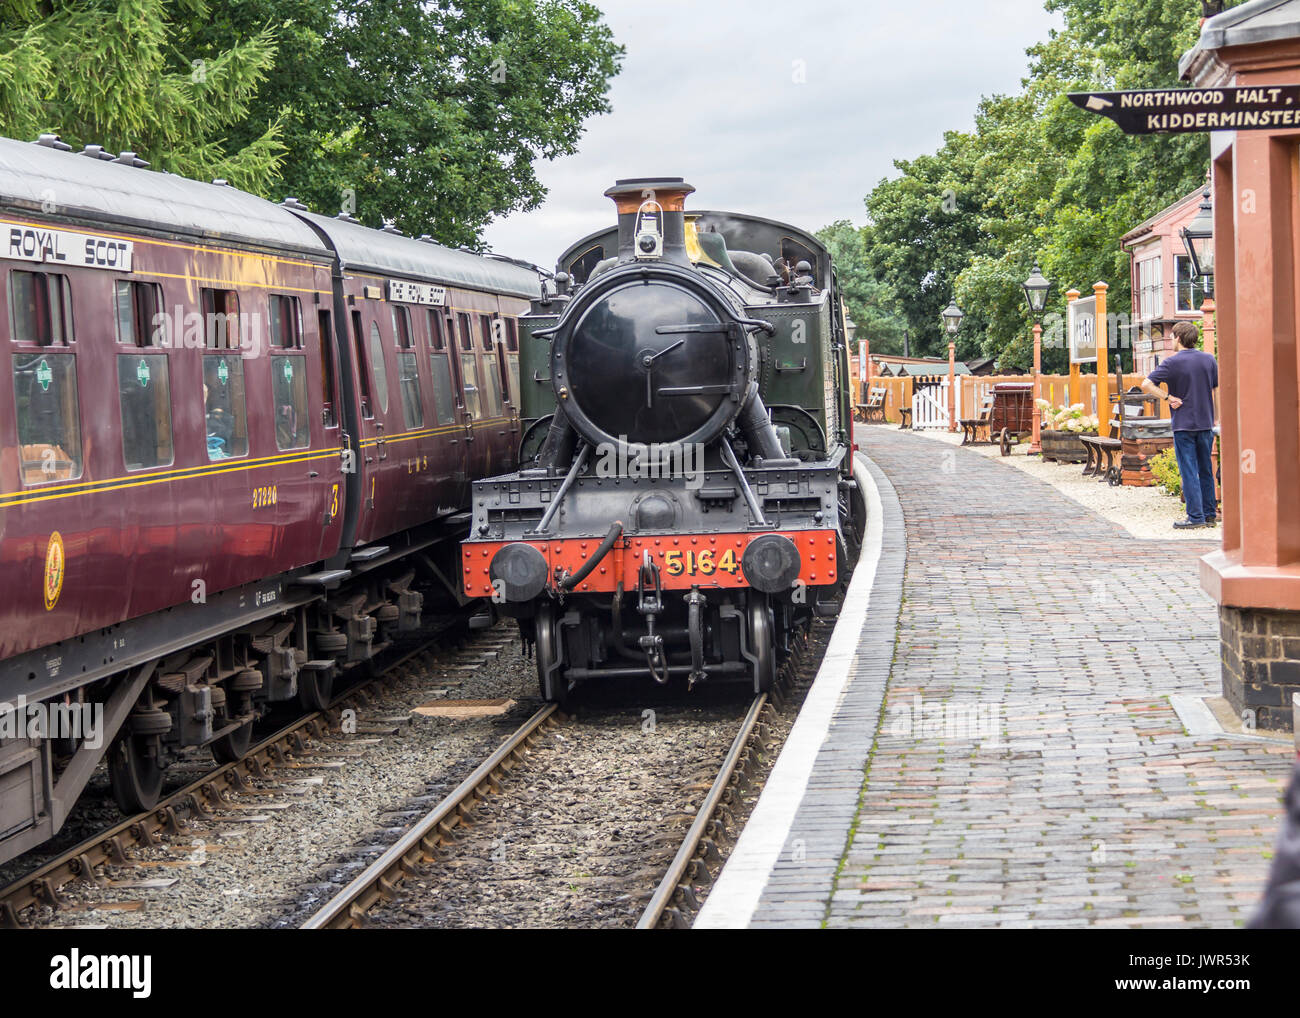 Engine No 5164 coming into Arley Station, Shropshire. The image was taken 17 August 2013 and the train is part of the Severn Valley Railway Trust Stock Photo